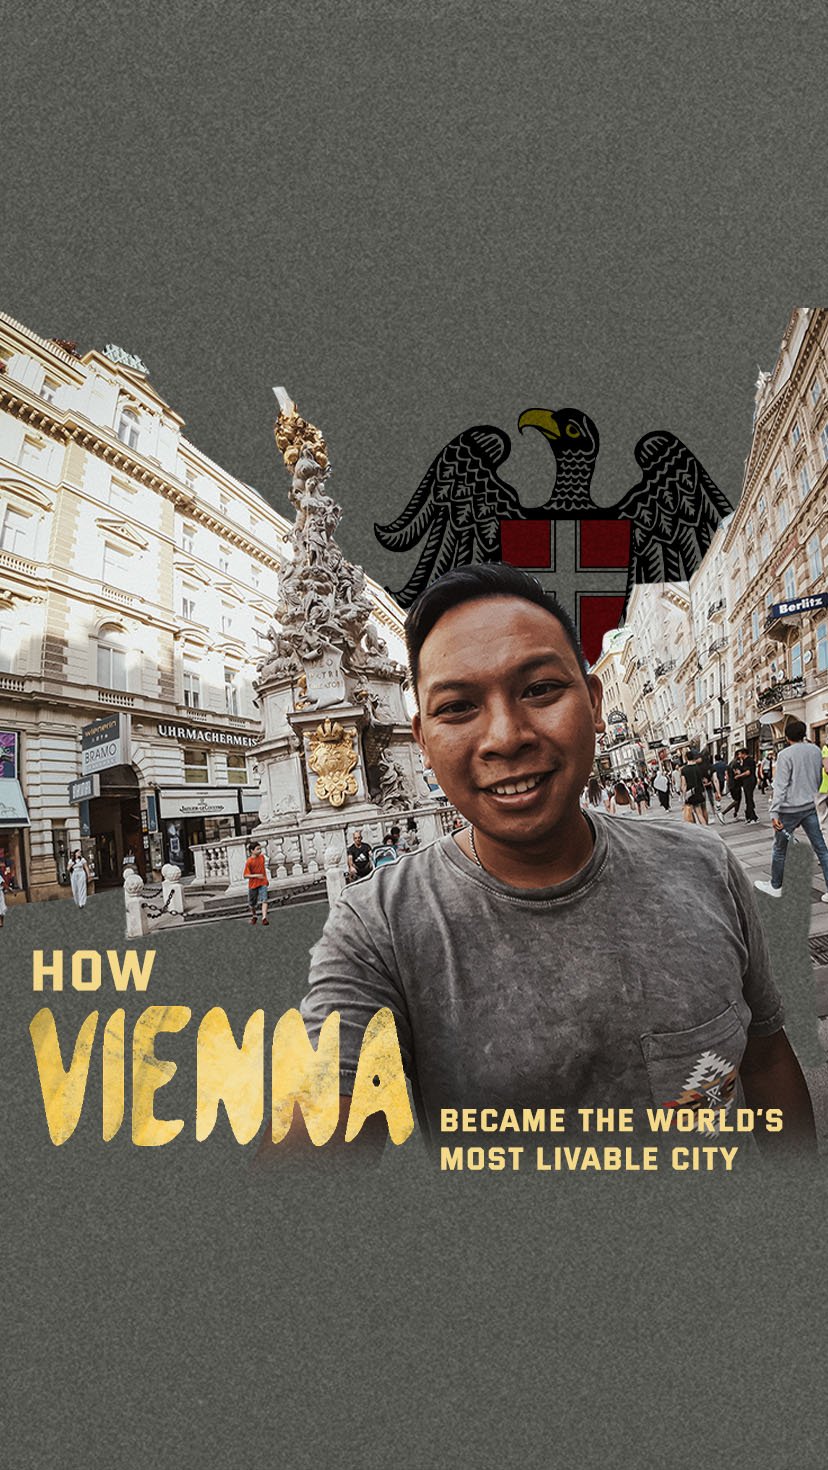 How Vienna Became So Livable